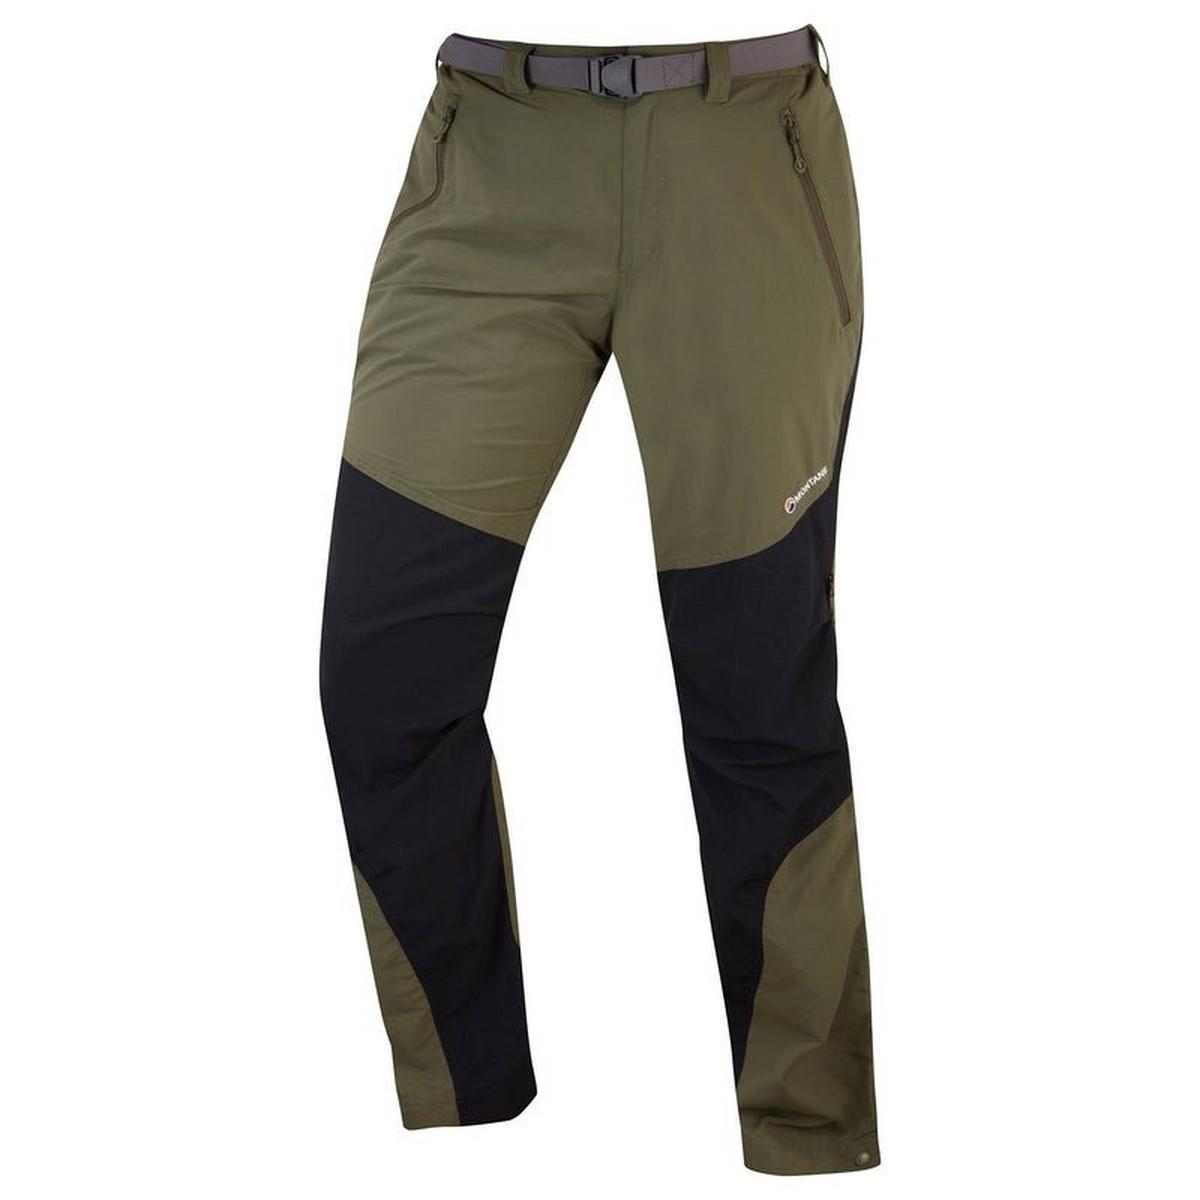 Men's DWR Pants - All in Motion Moss Green XXL 1 ct